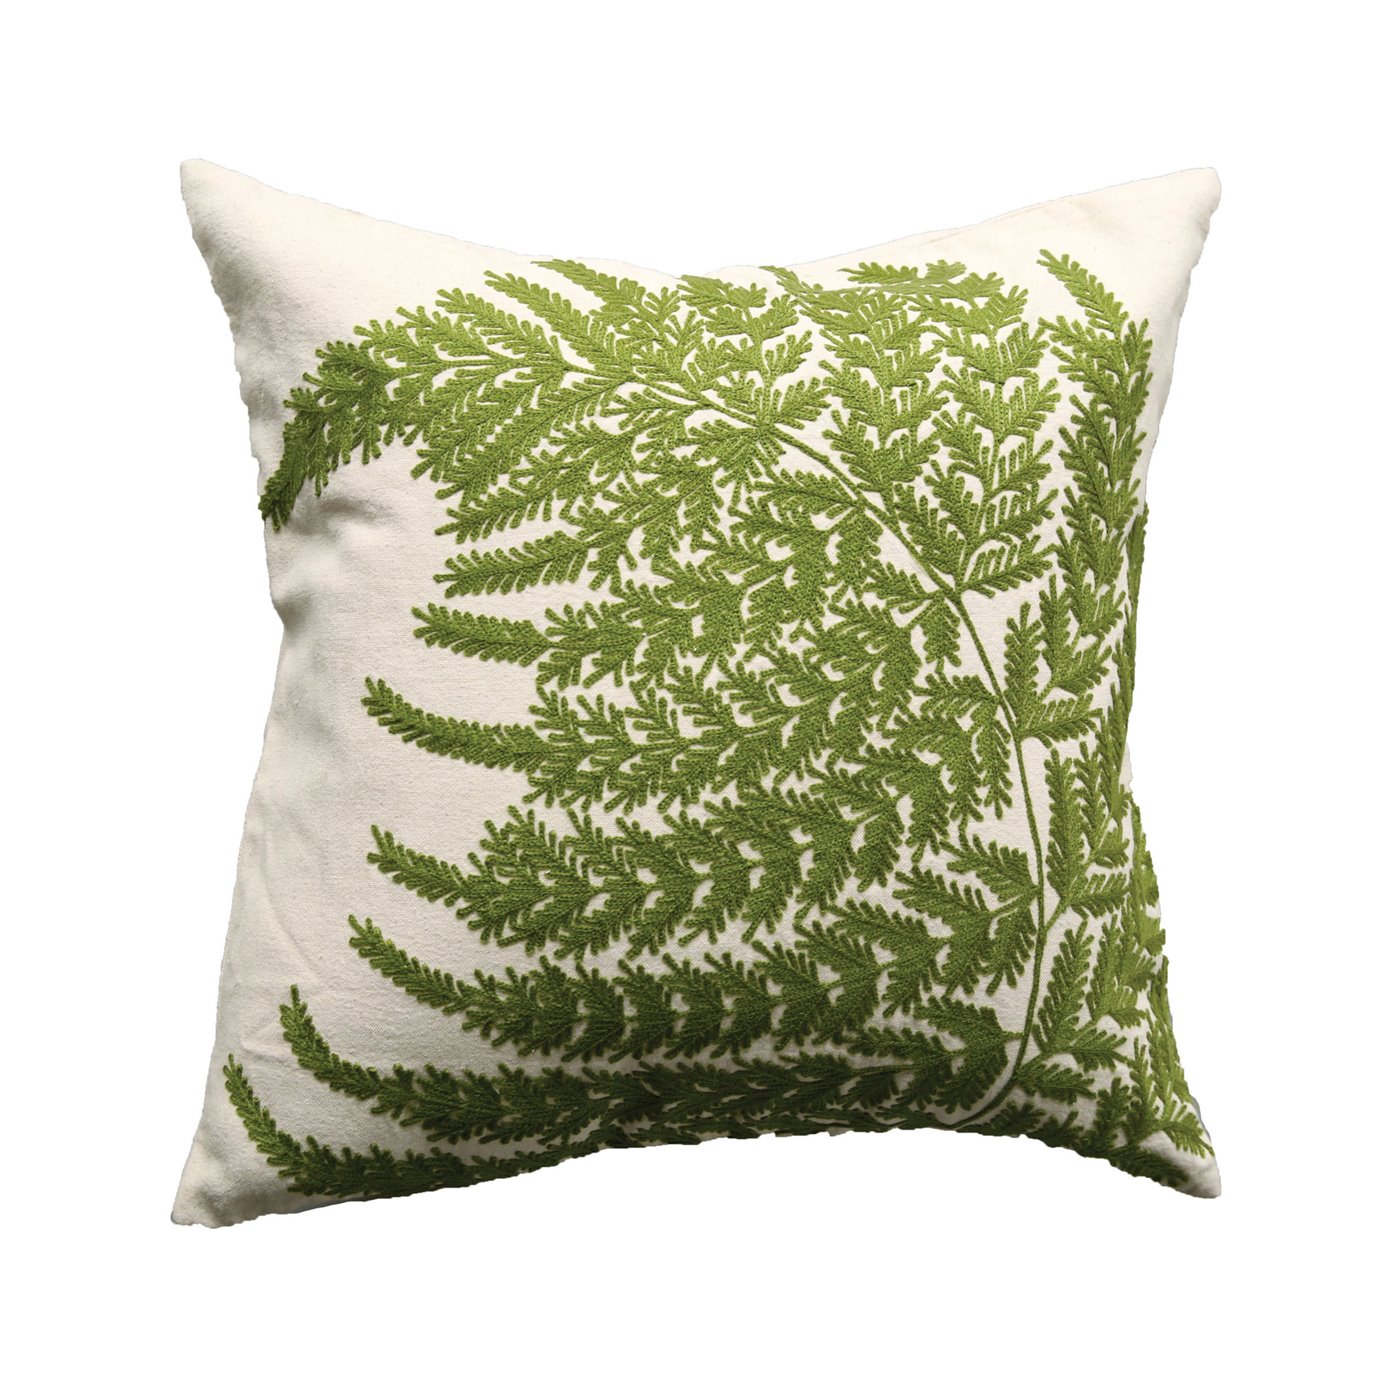 White Square Cotton Pillow with Embroidered Green Ferns